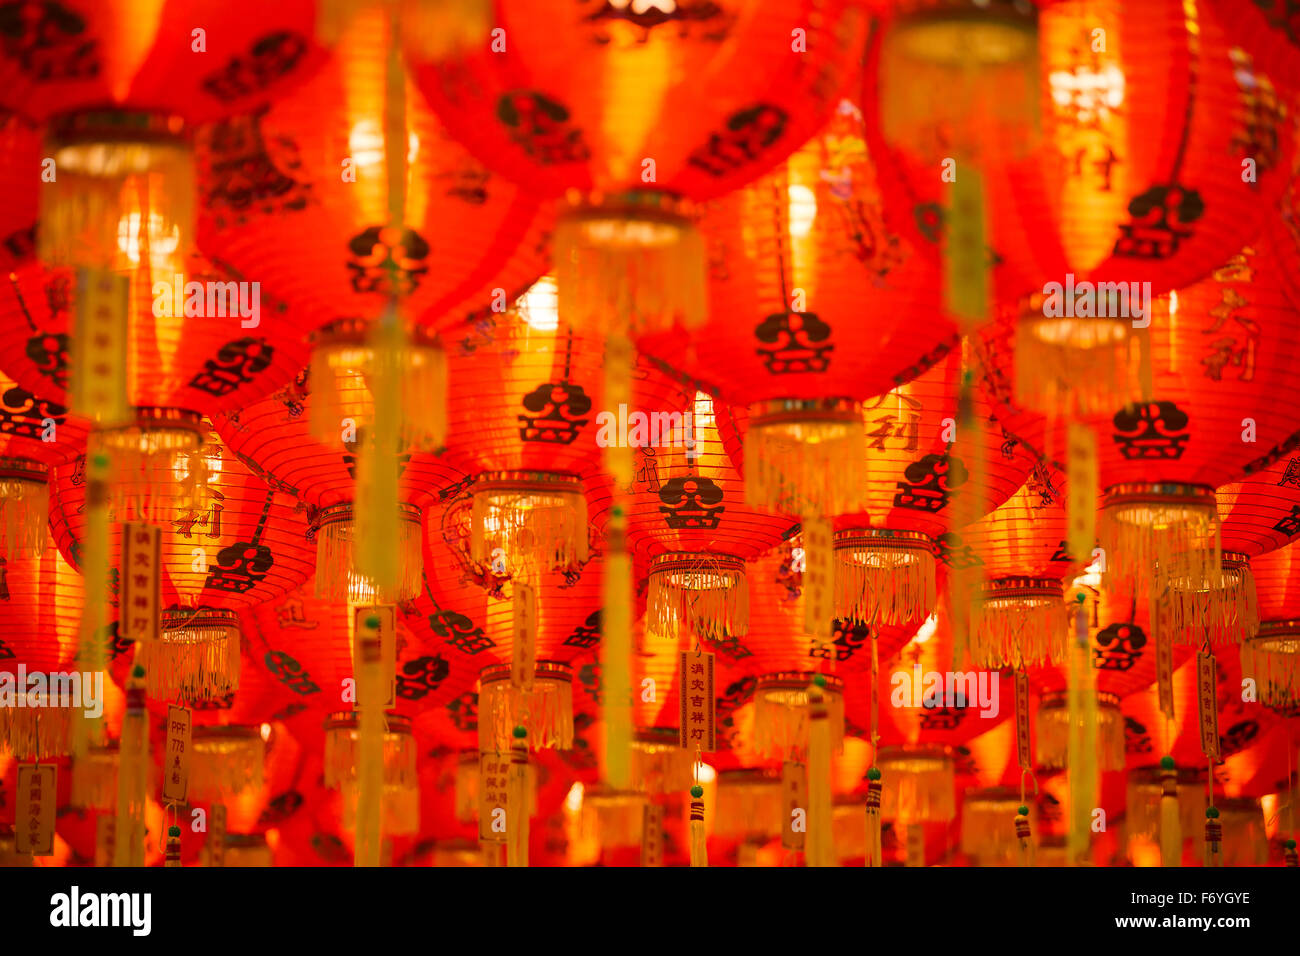 Chinese New Year red and yellow paper lanterns Stock Photo